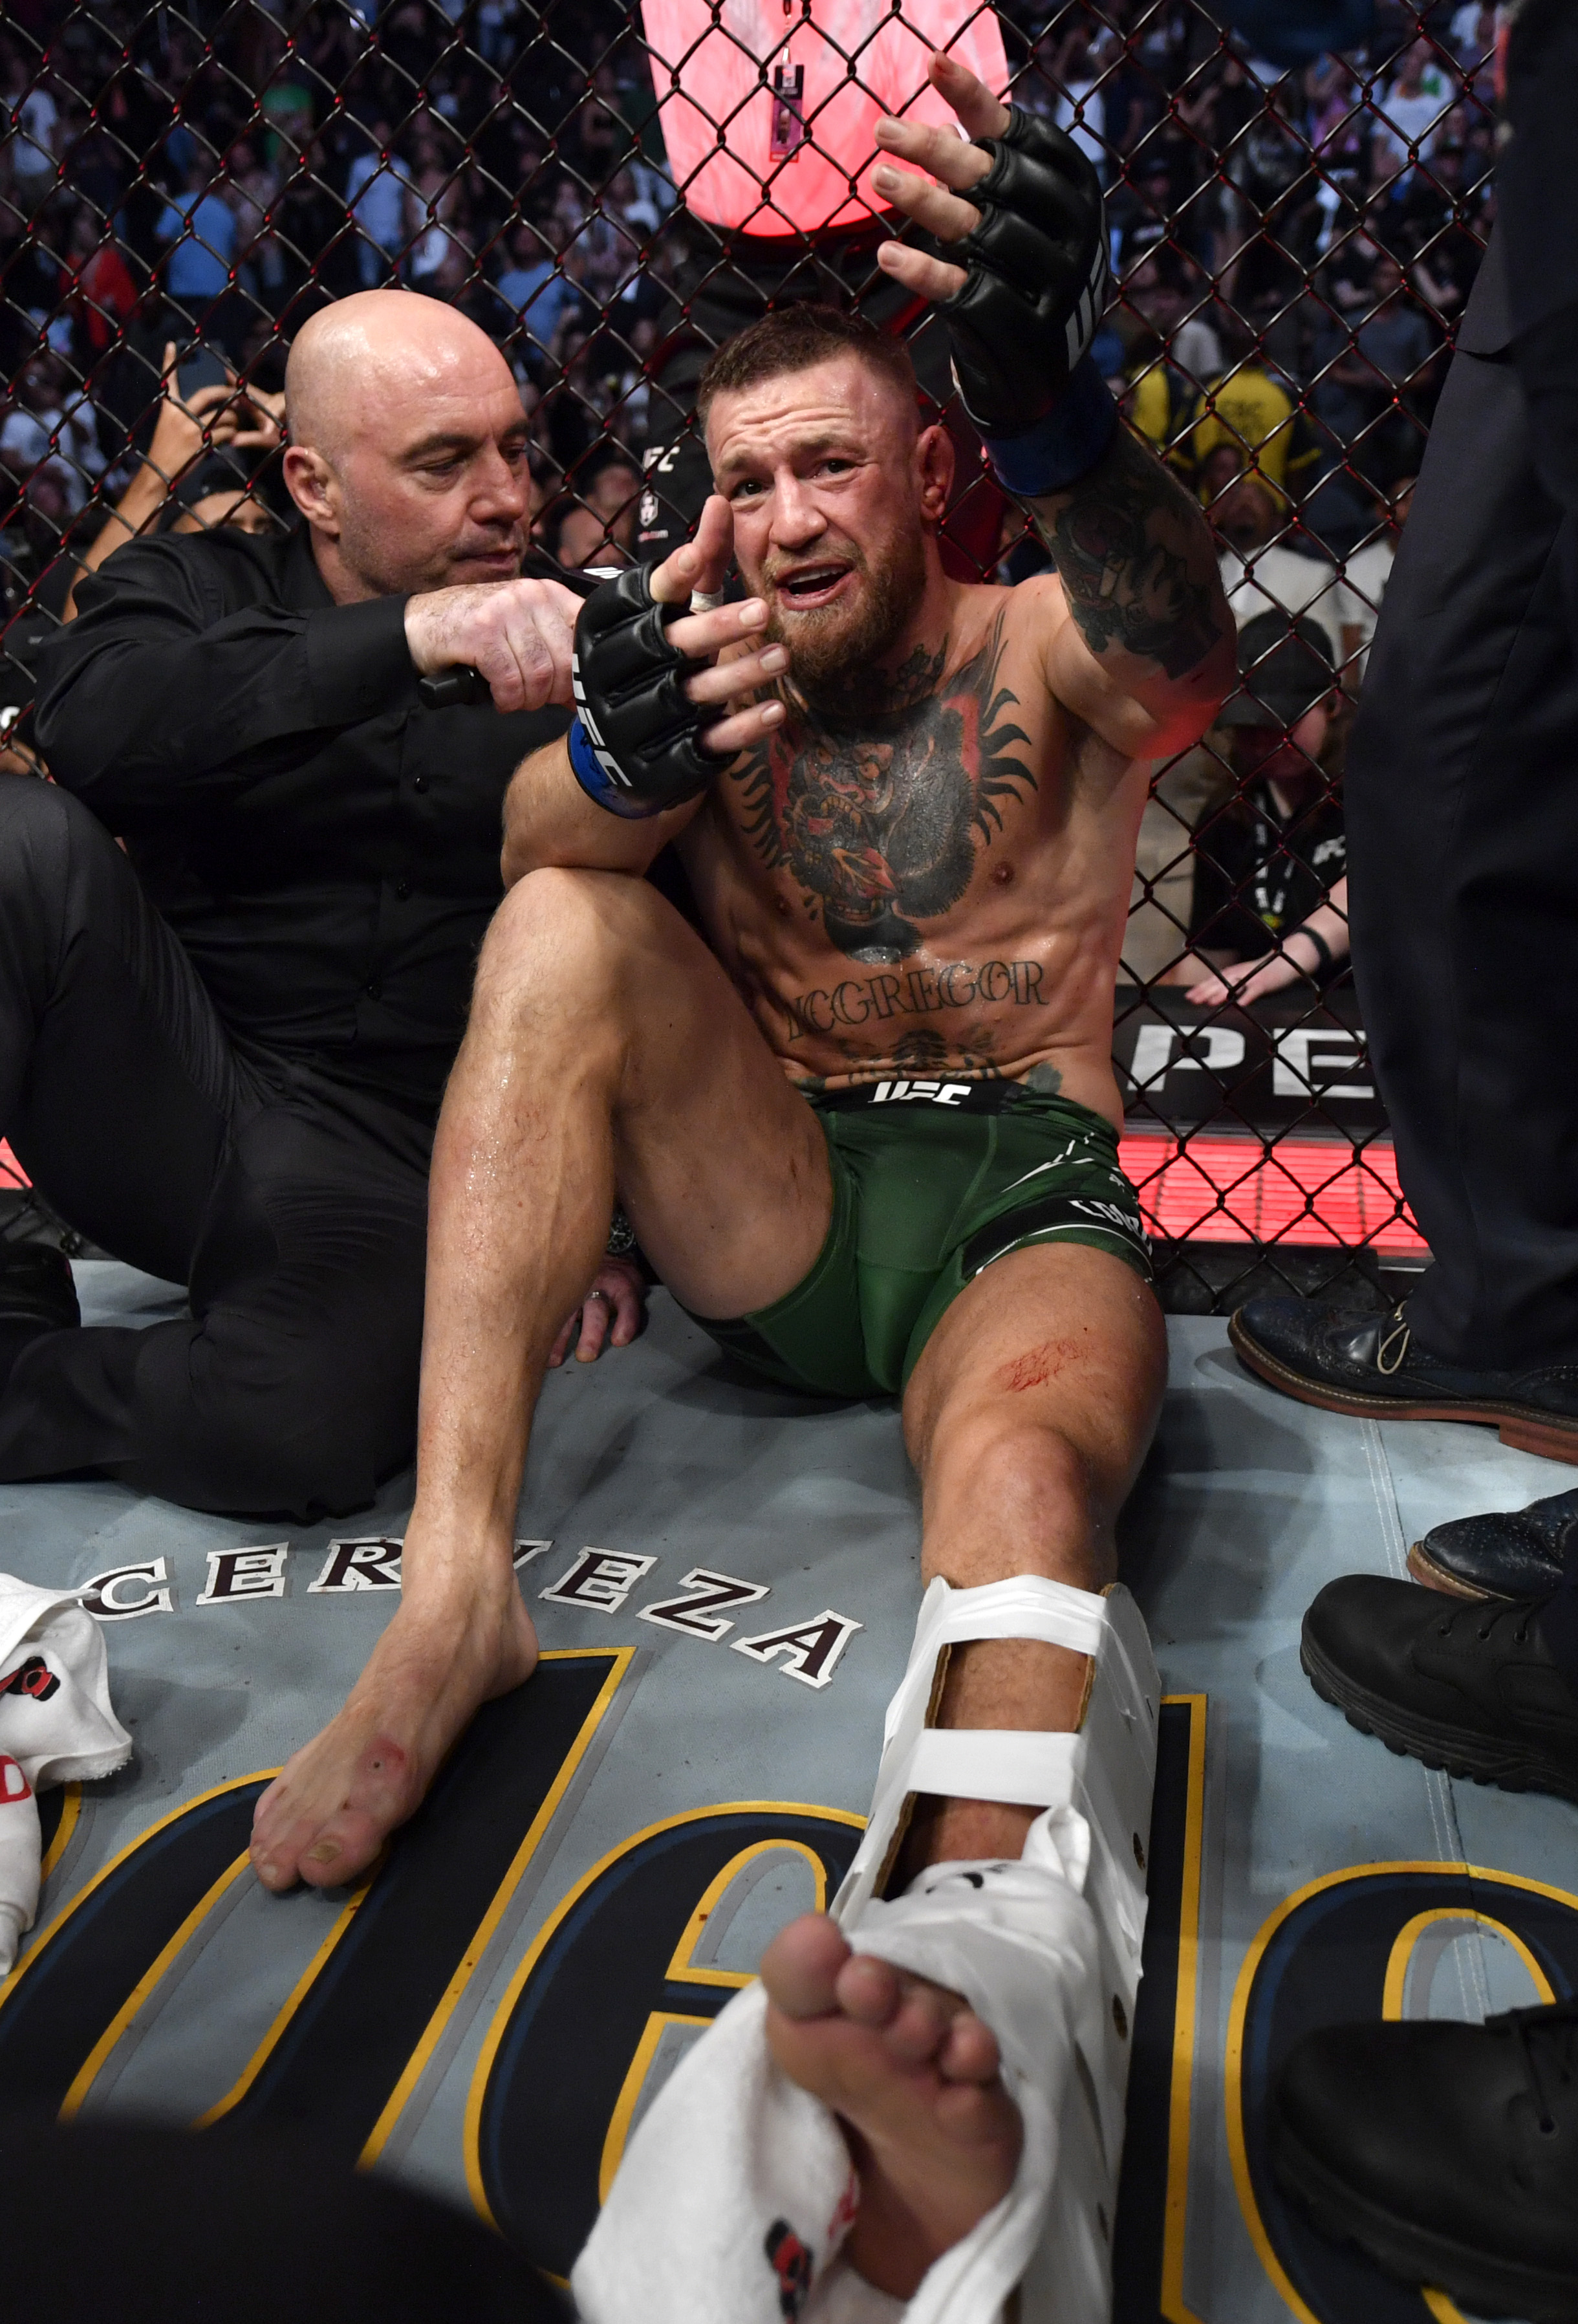 John Kavanagh is ‘pretty miffed’ at the idea of Joe Rogan interviewing Conor McGregor right after his UFC 264 headliner against Dustin Poirier.